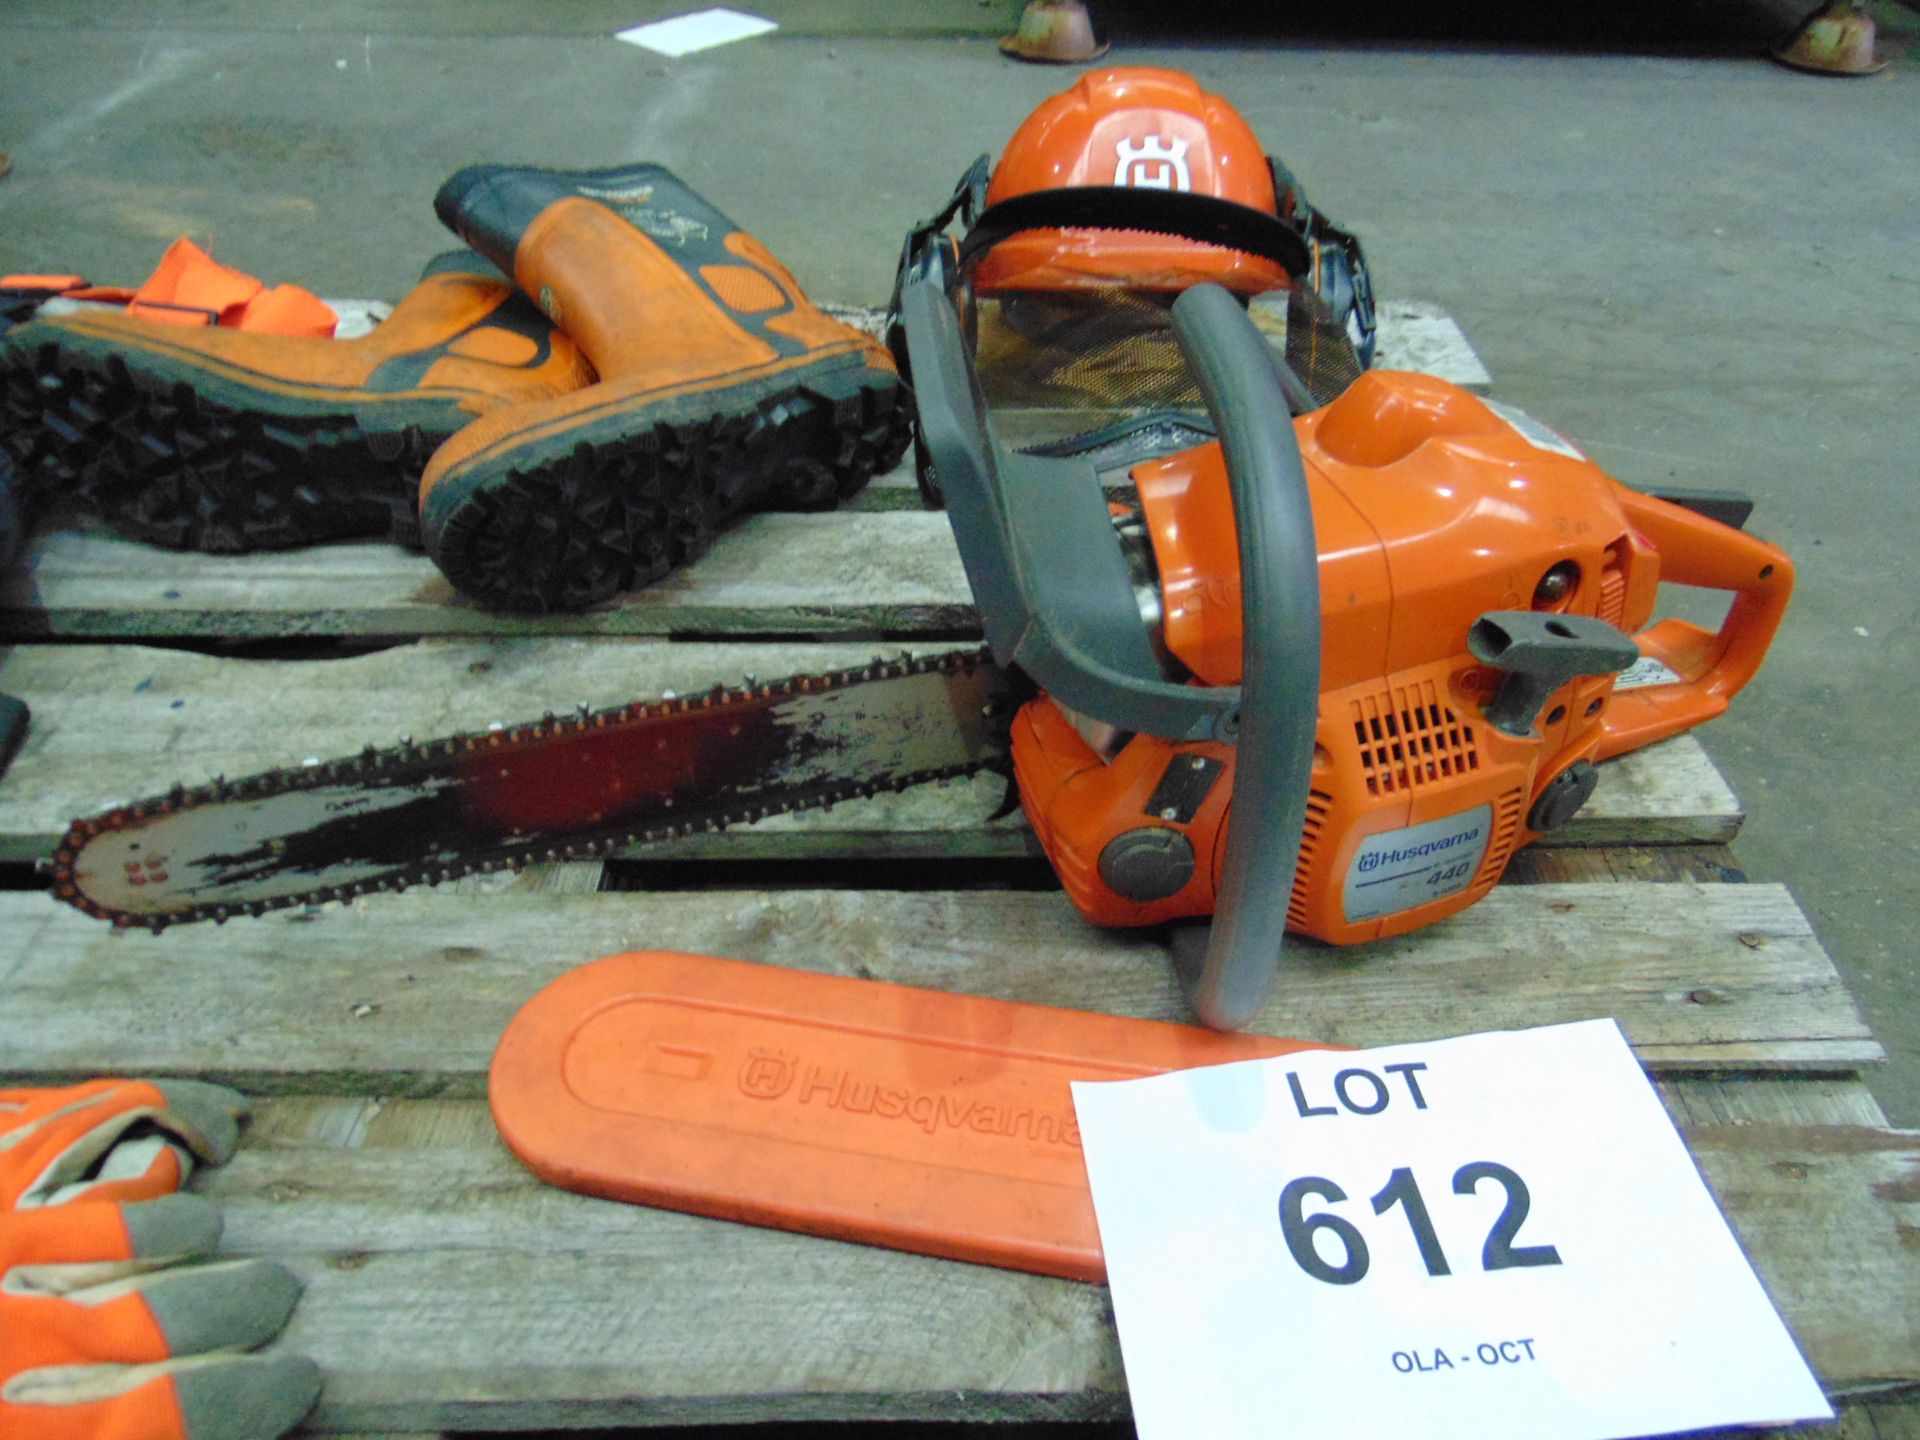 Husqvarna 440 Chainsaw C/W Protective Eqpt inc Trousers, Helmet, Gloves and Boots - Image 2 of 7